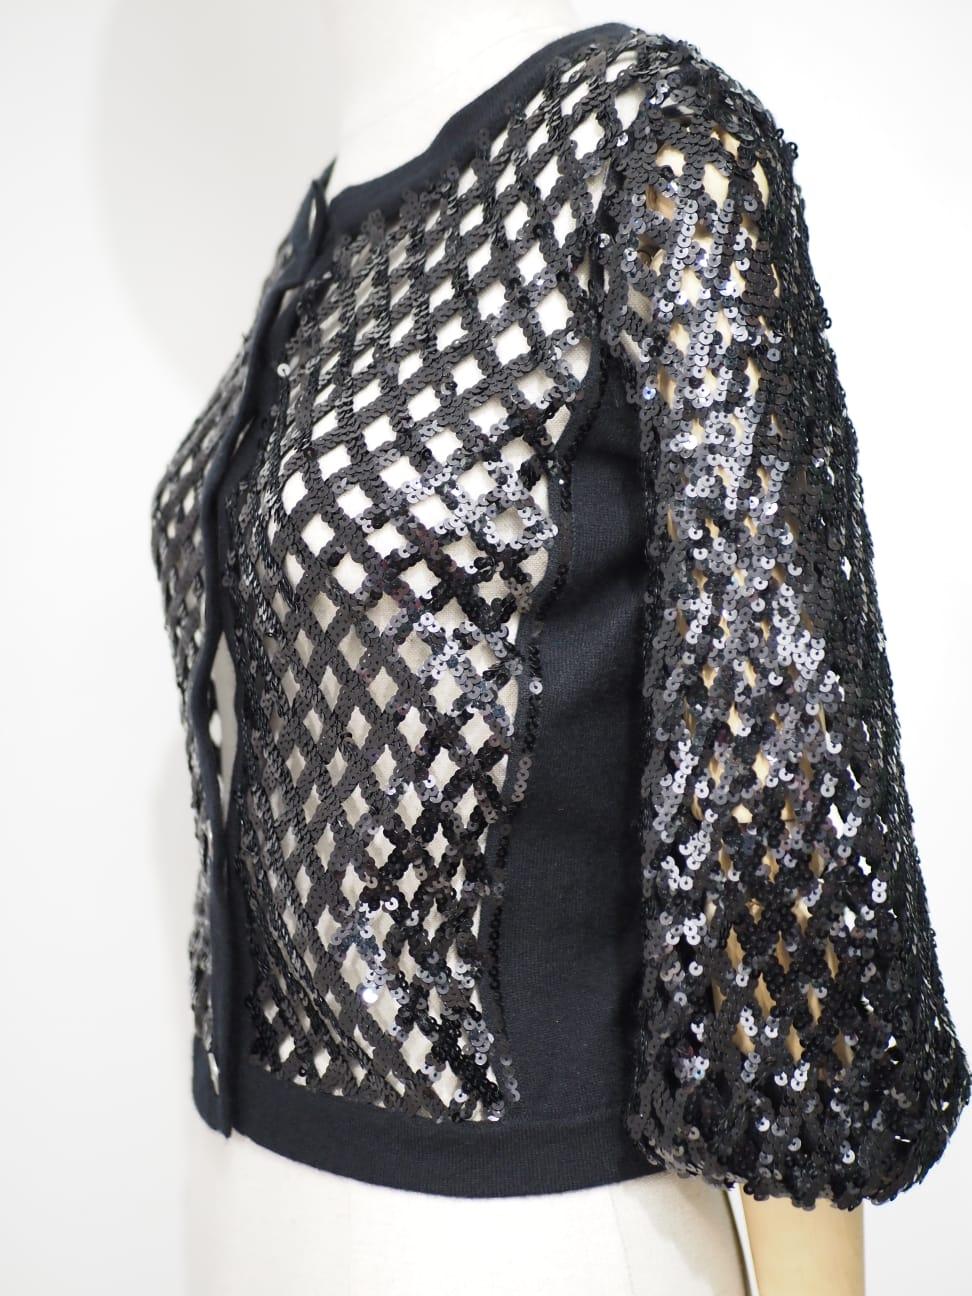 Chanel Sequin Cardigan - 8 For Sale on 1stDibs